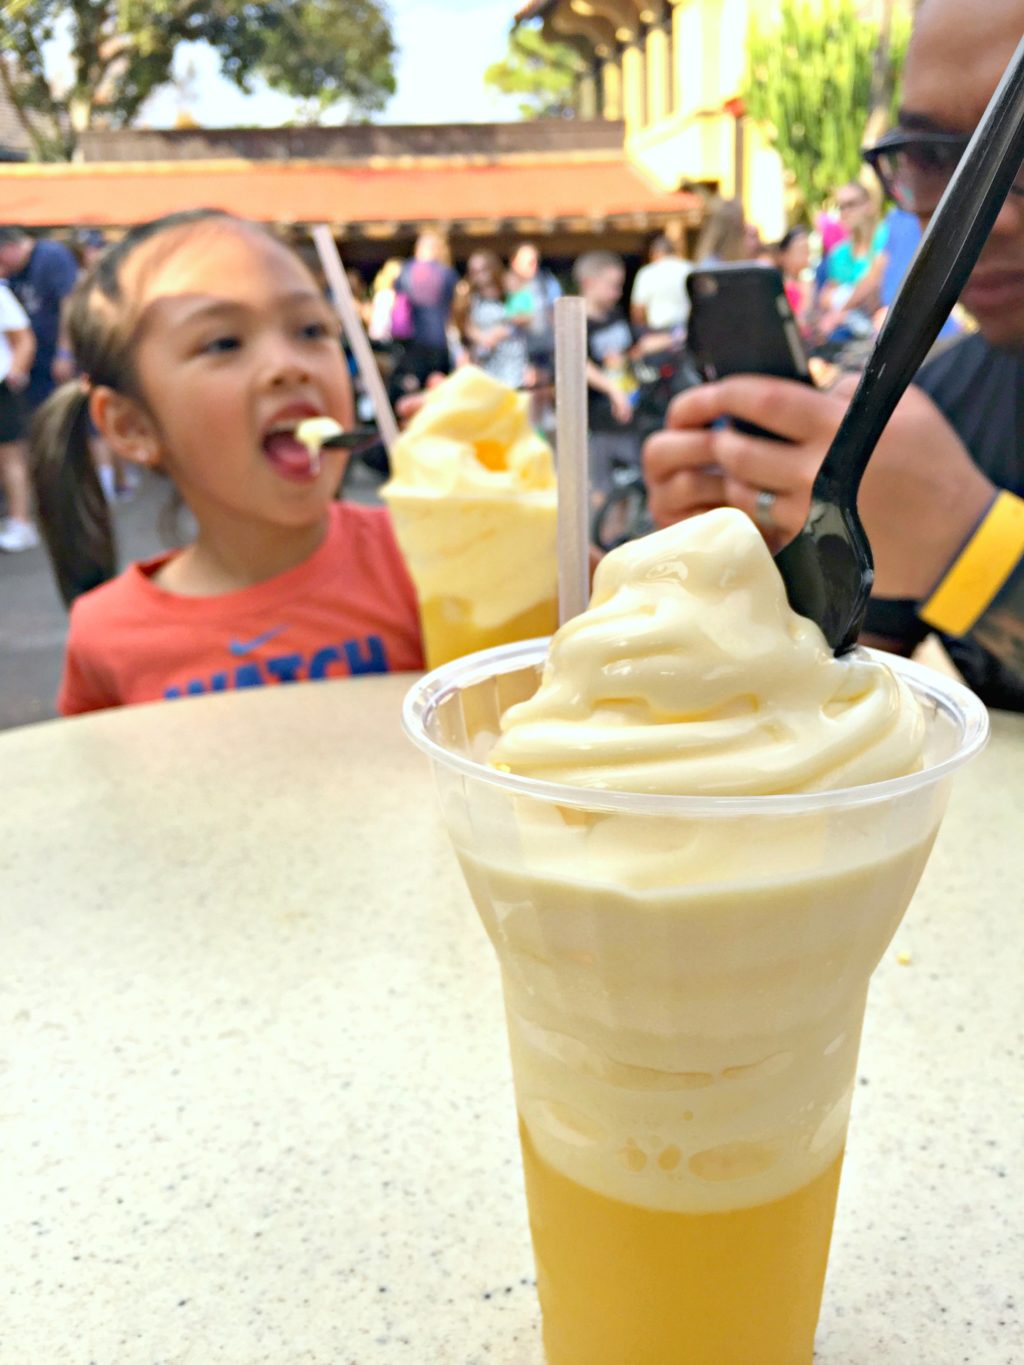 A Dole Whip is pictured while a child enjoys a Dole Whip in the background.